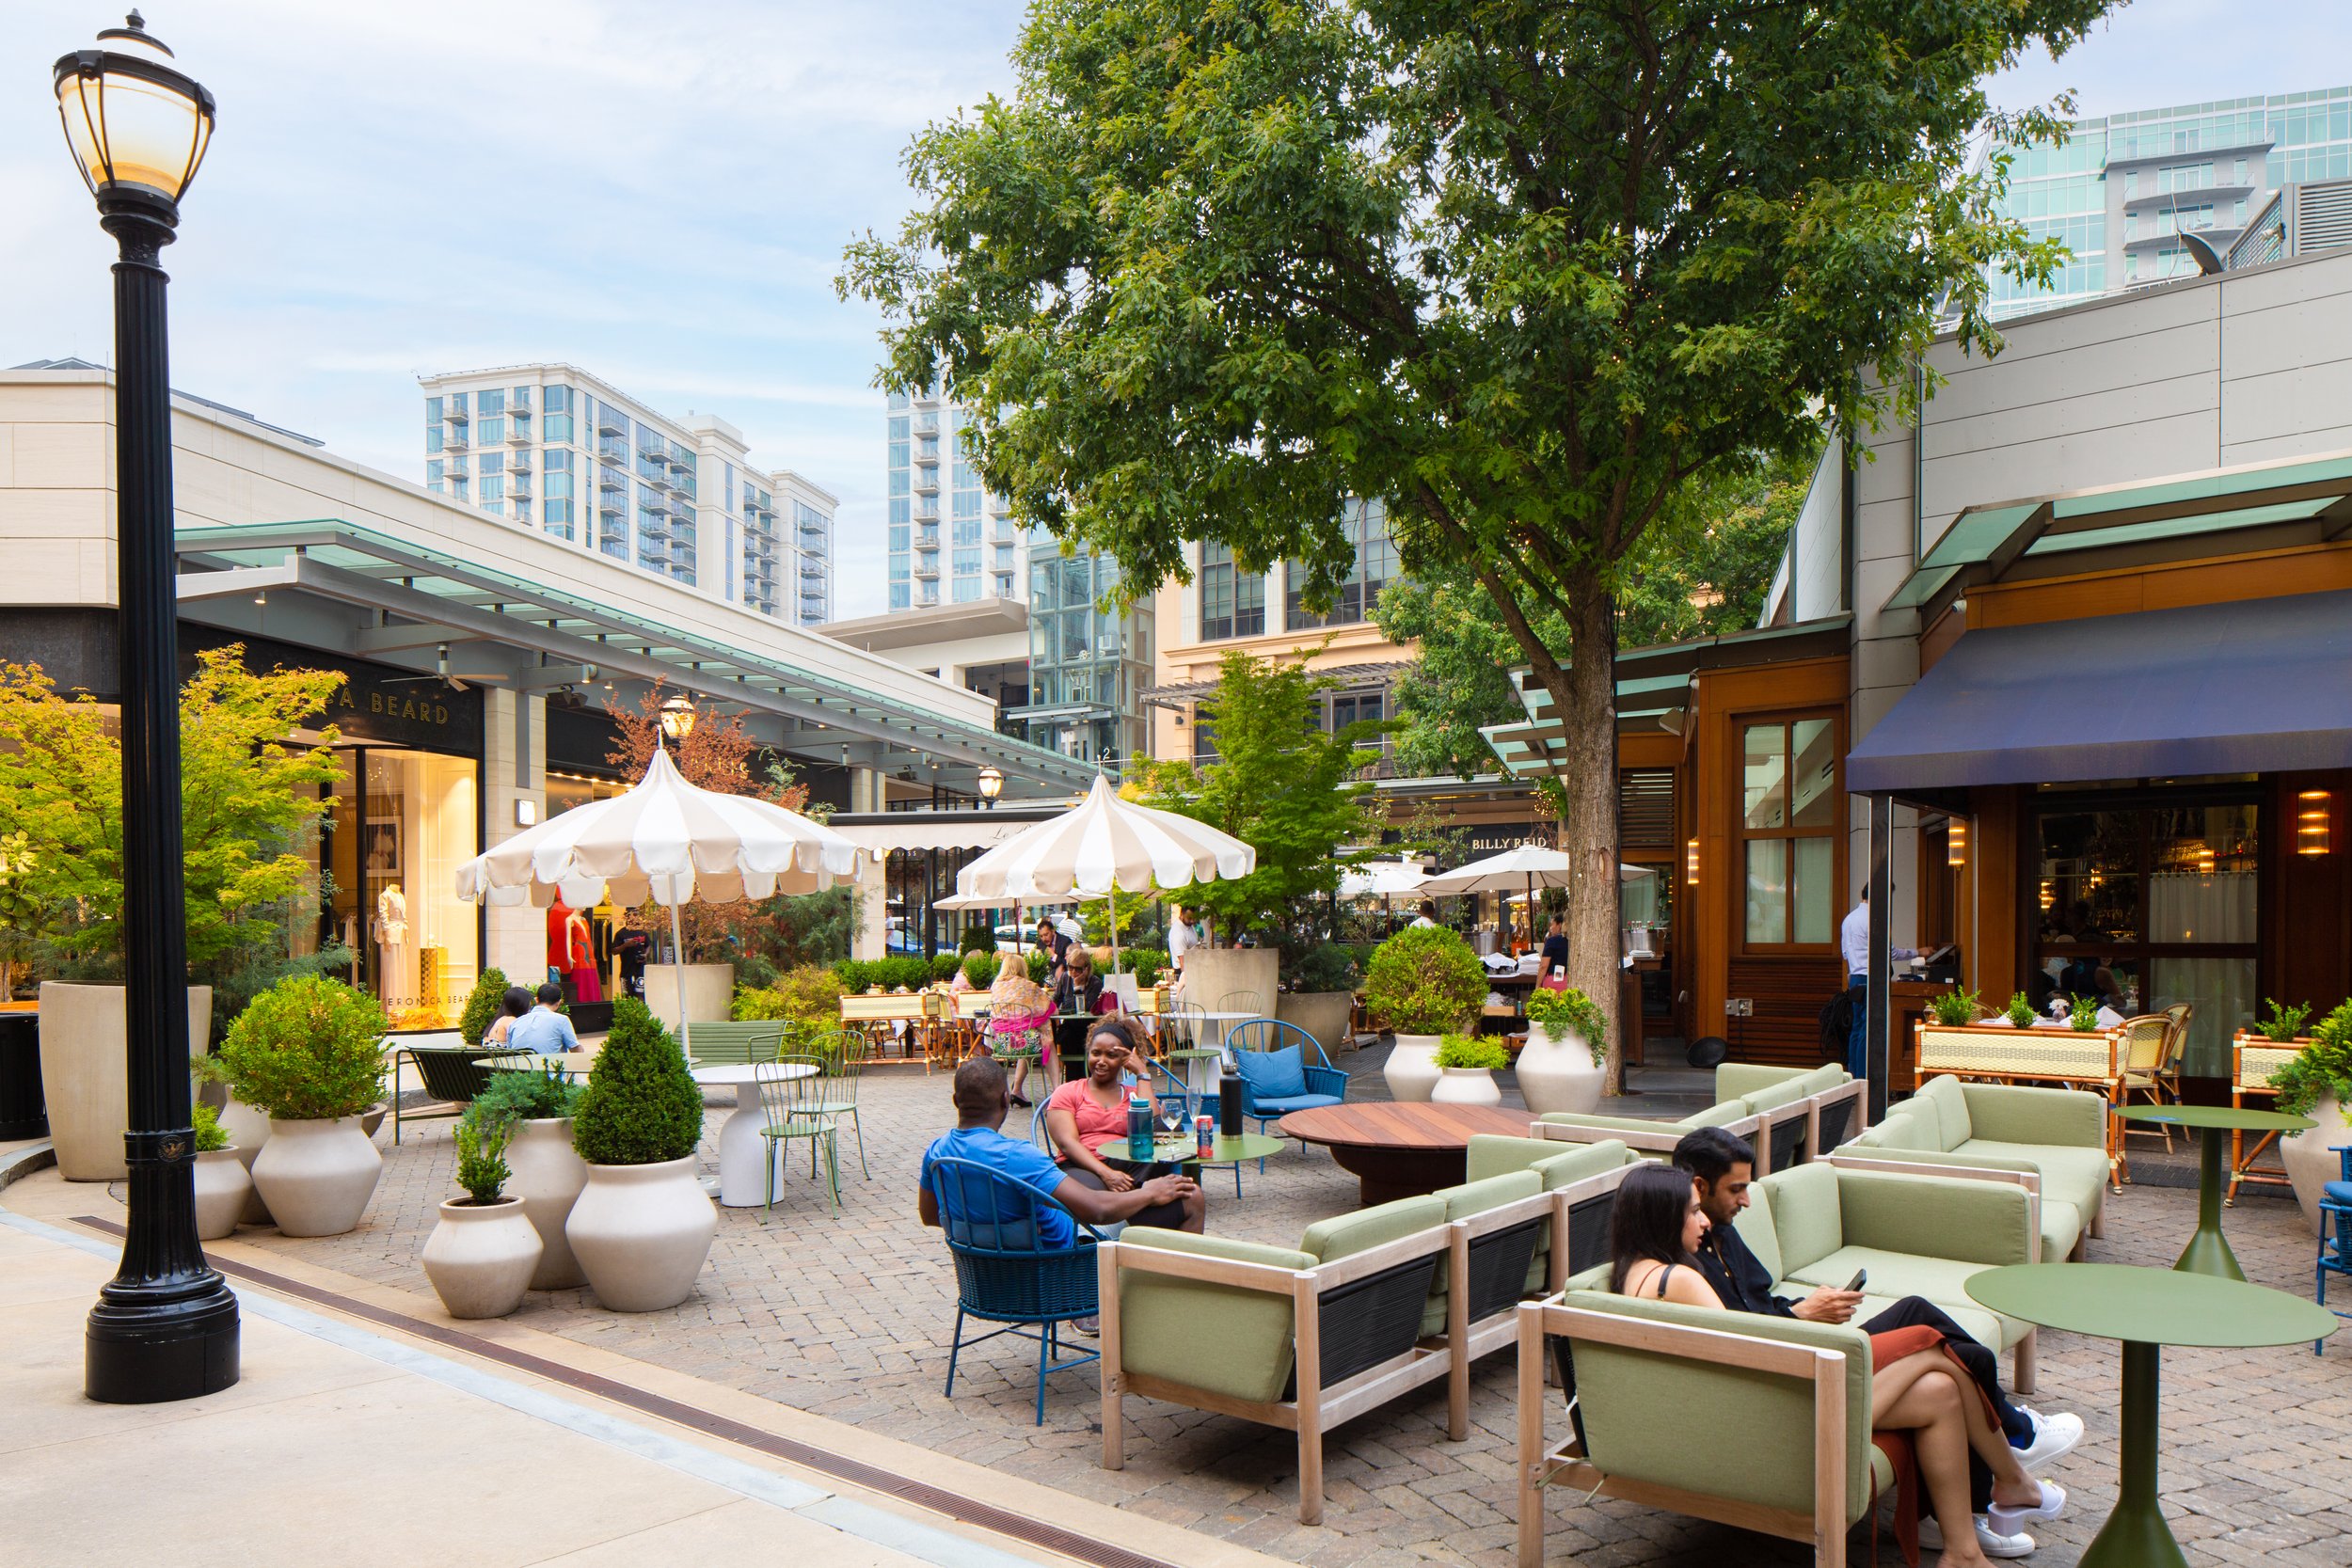 Spend the Day Shopping in Buckhead